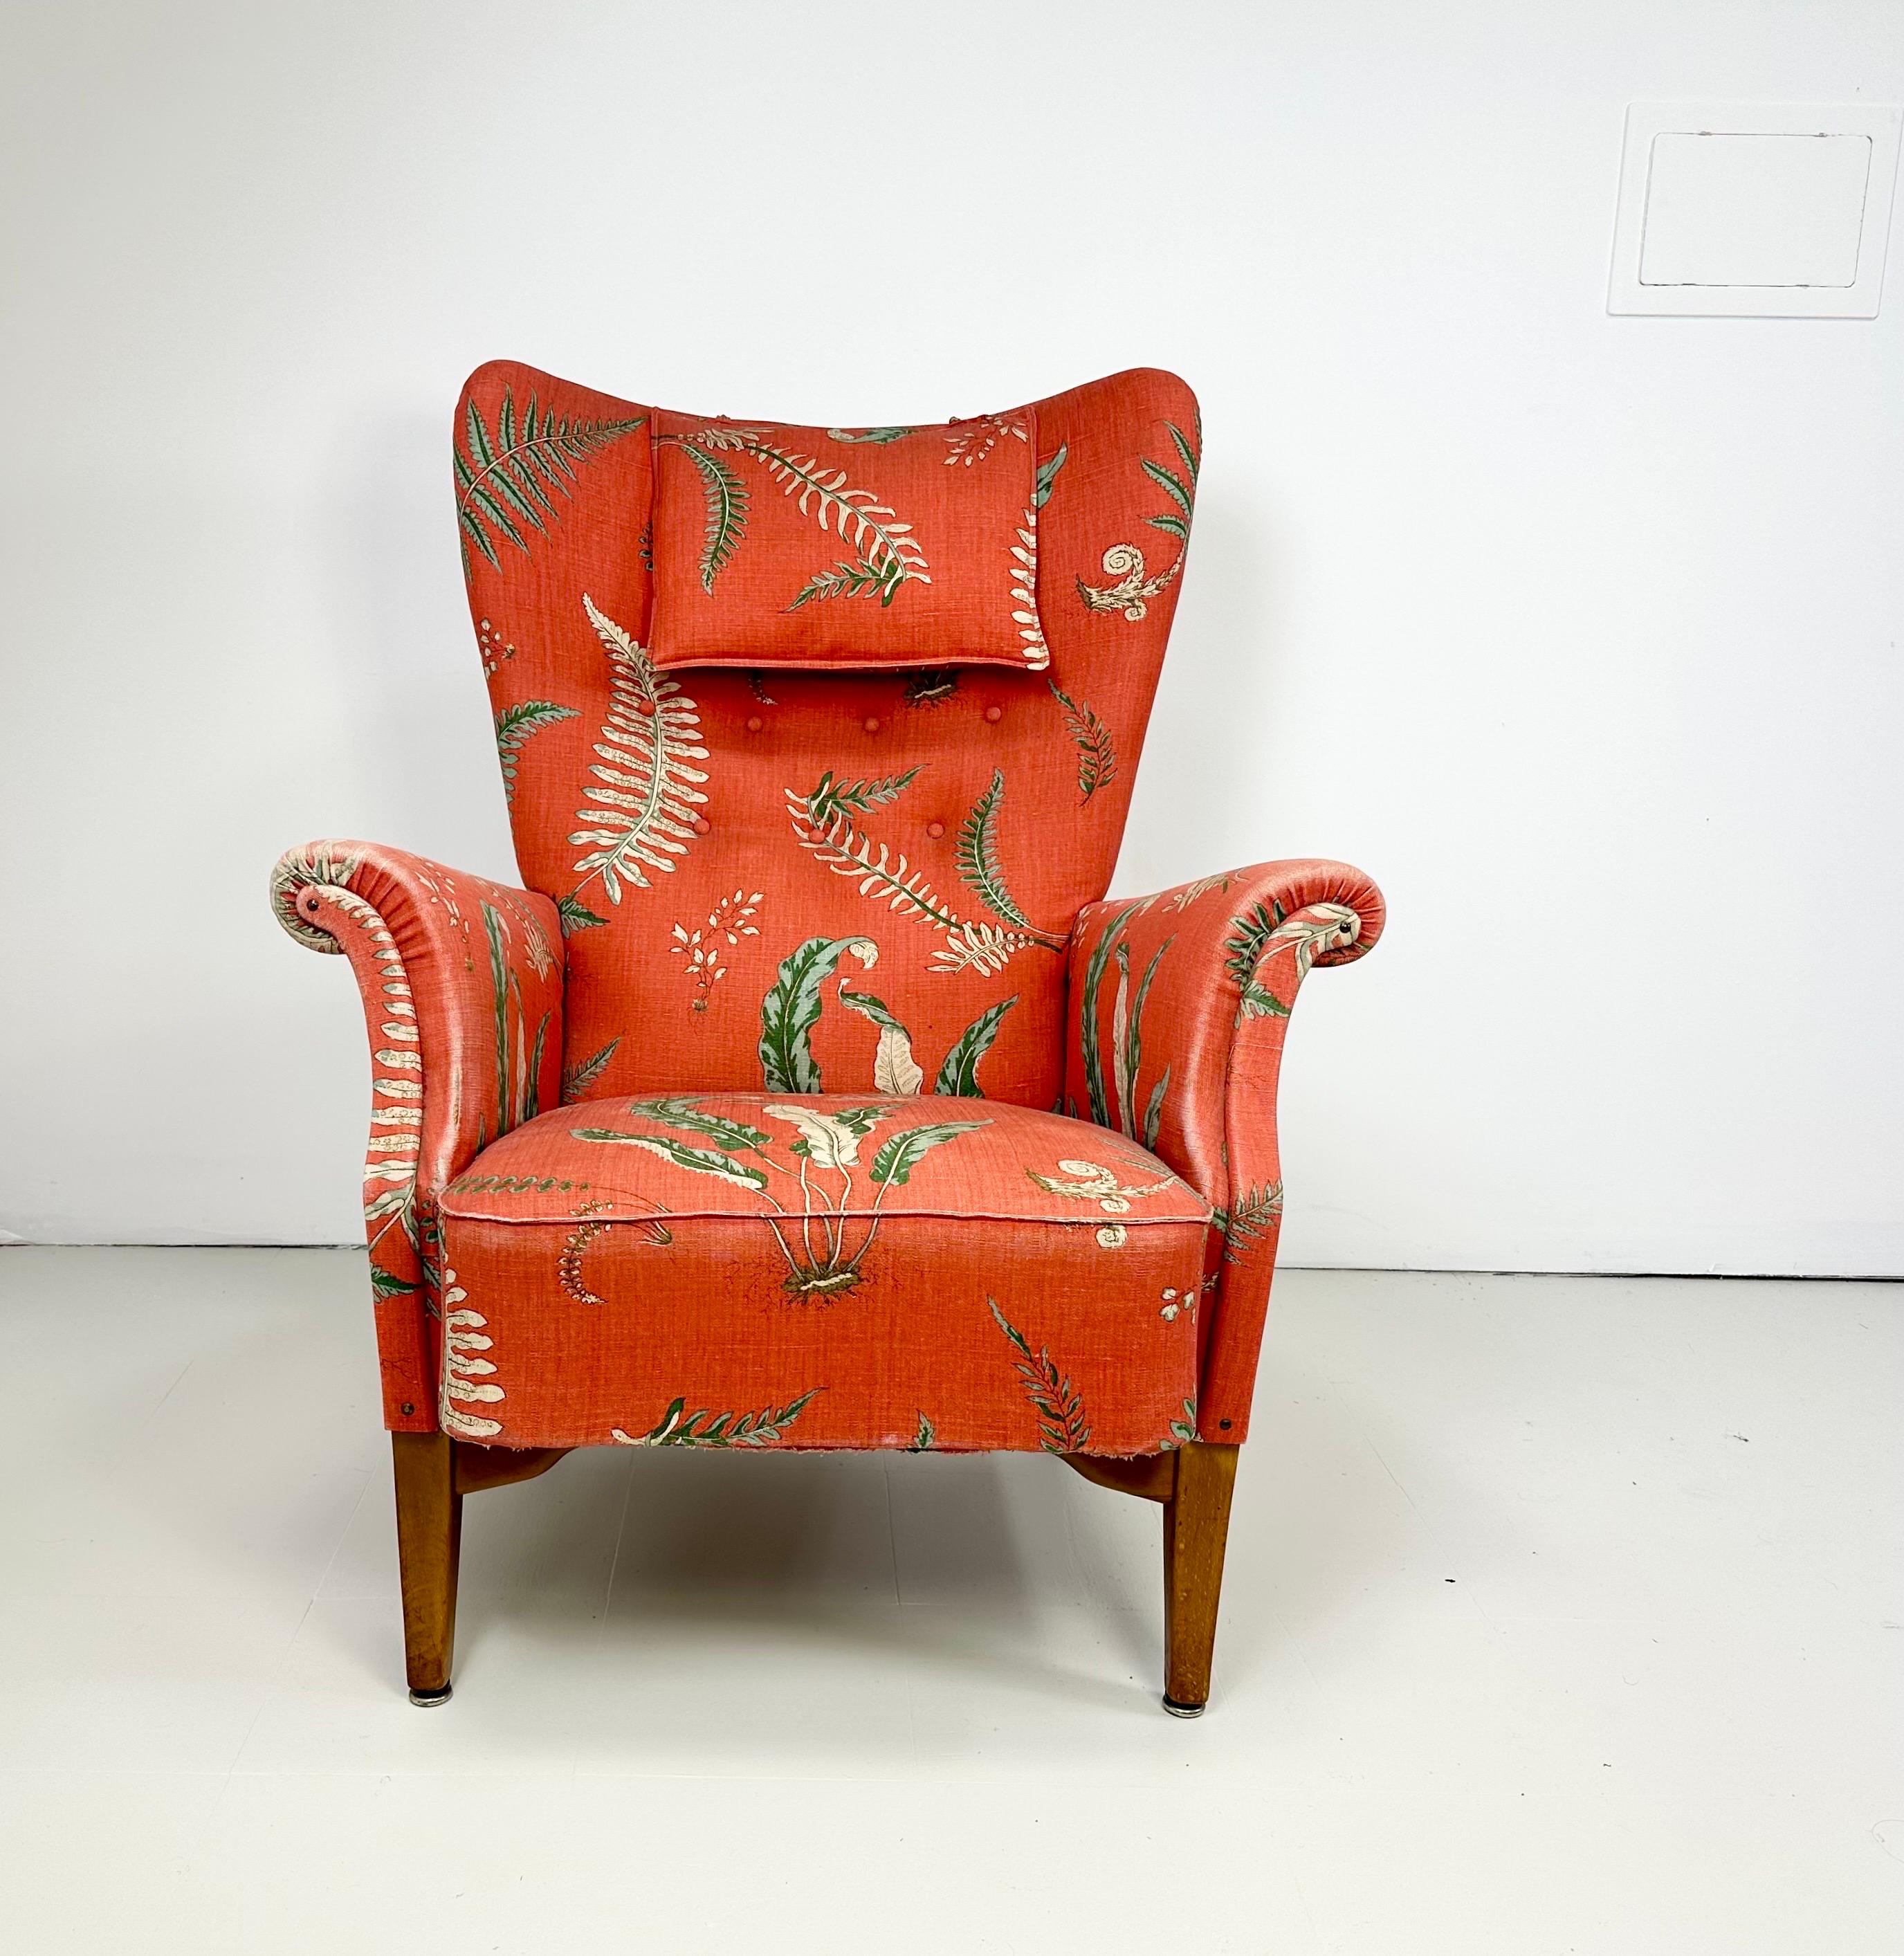 Scandinavian Modern 1950’s Dux Lounge Chair With Vintage “Fern” Upholstery For Sale